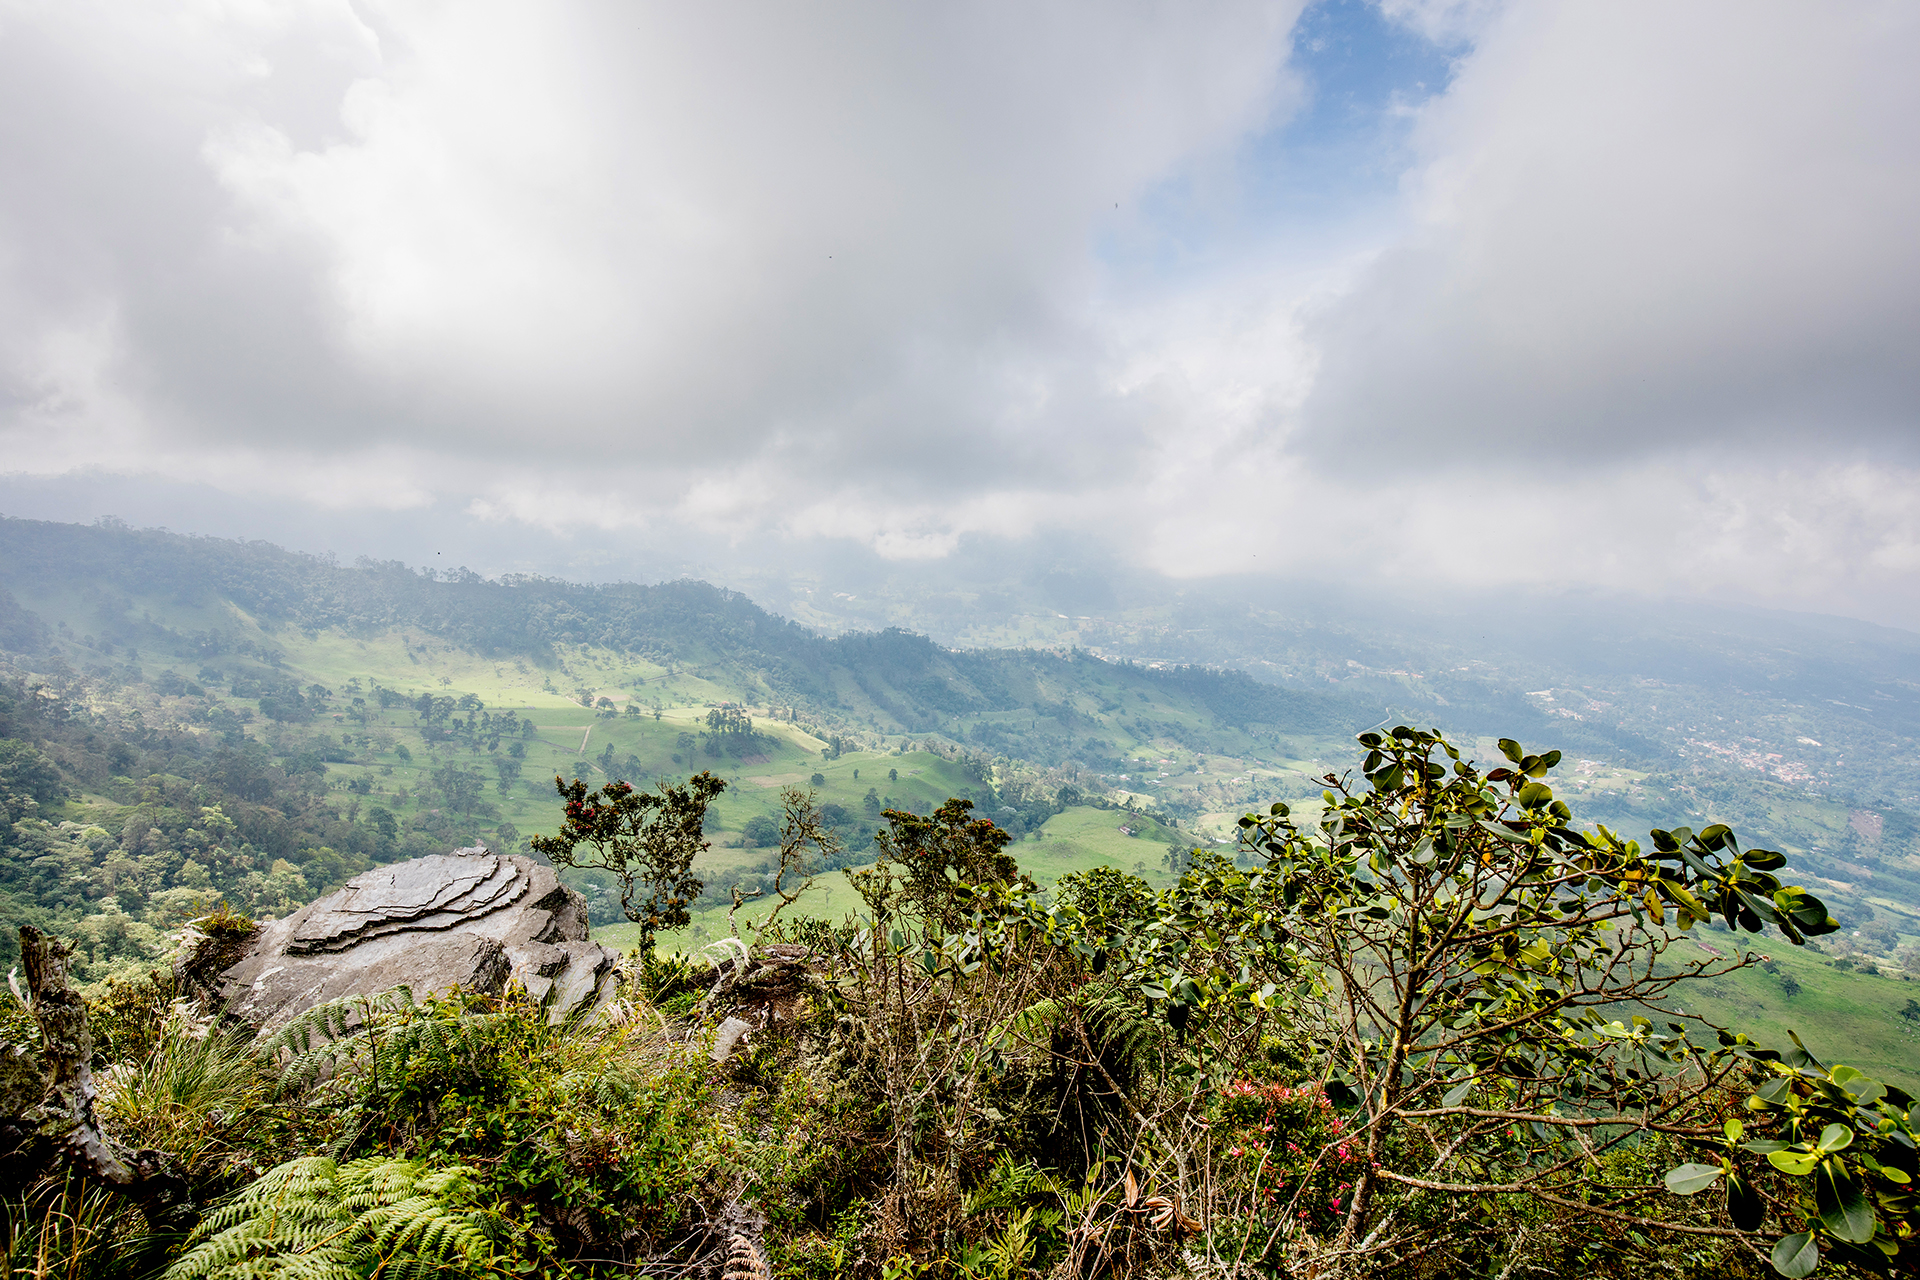 A view from a mountaintop shows a lush green valley below, surrounded by hills and partly covered by clouds. Sparse vegetation and rocks are in the foreground, capturing one of the many breathtaking sights you can experience on tours in Bogotá.